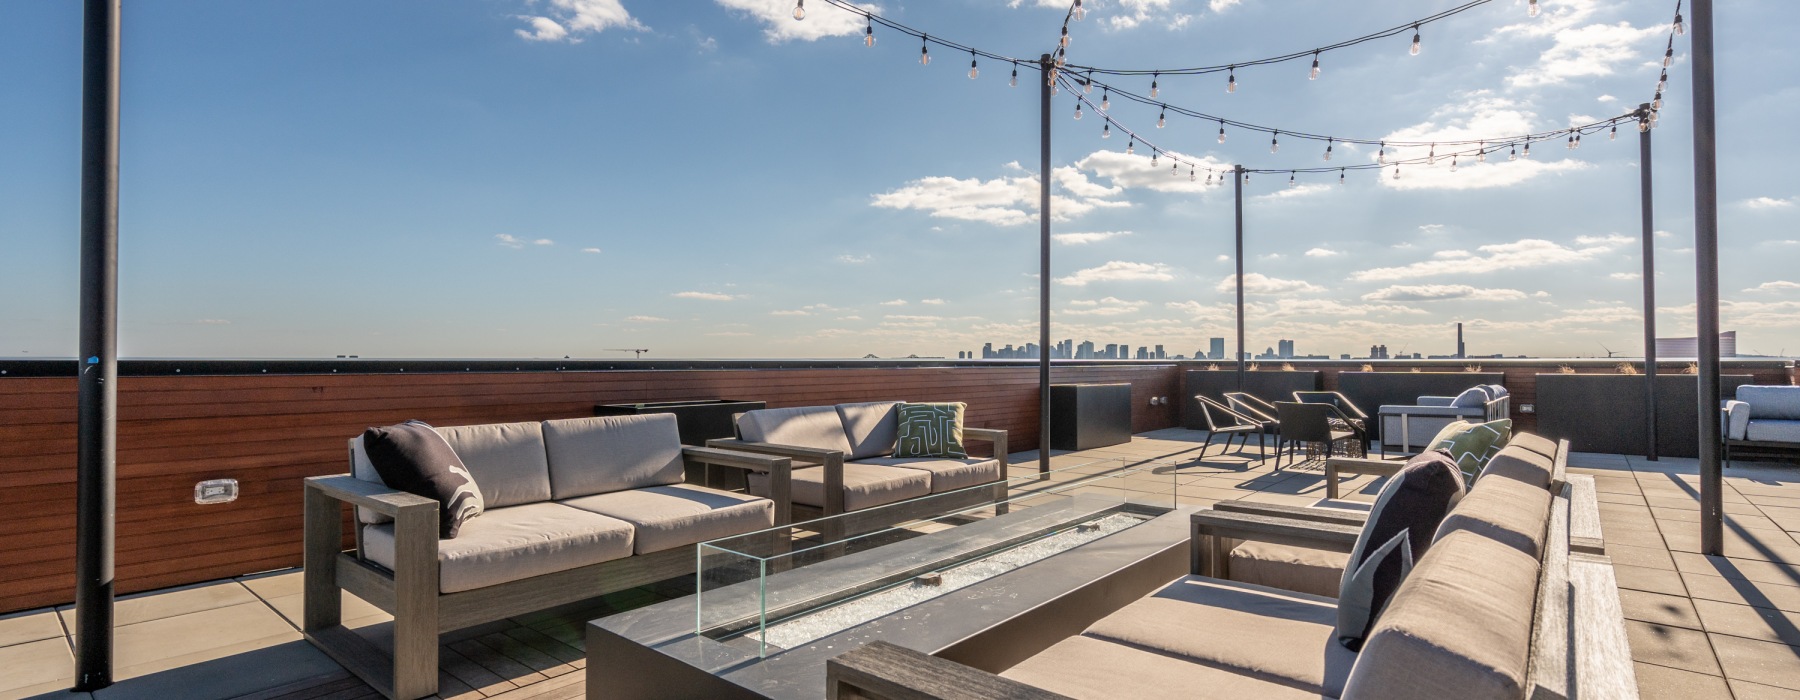 The600 roof deck